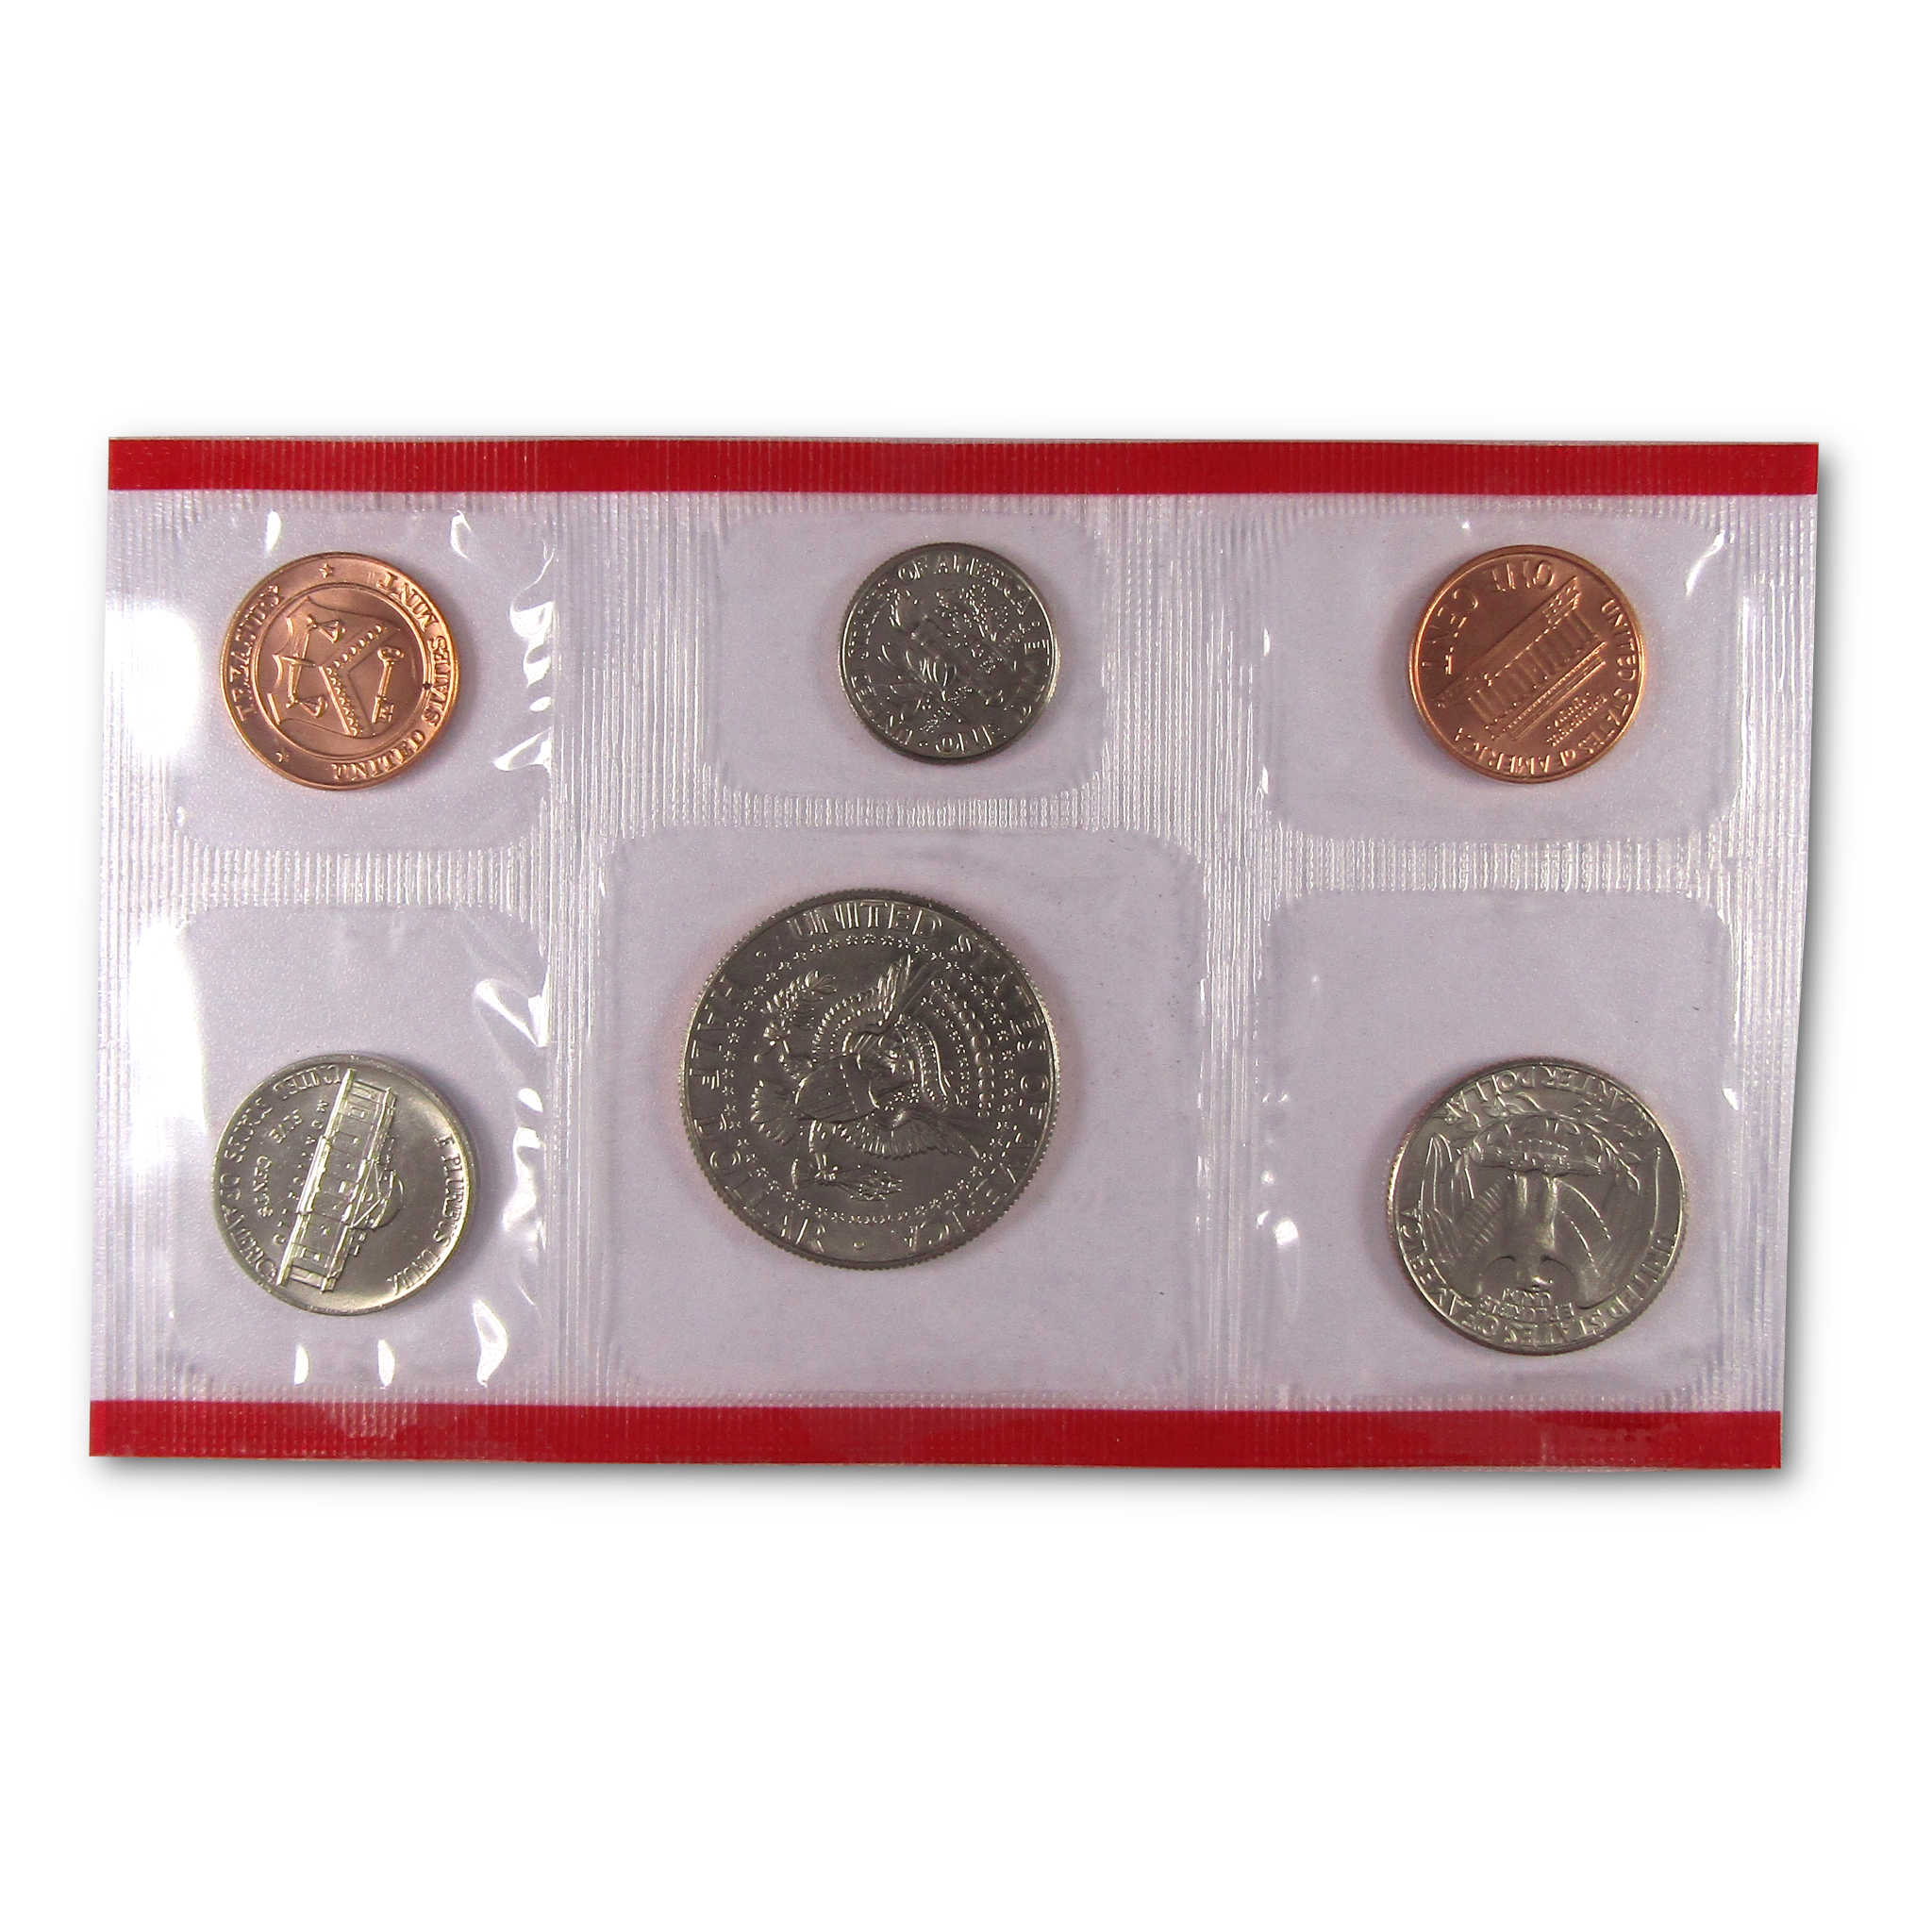 1986 Uncirculated Coin Set U.S Mint Original Government Packaging OGP